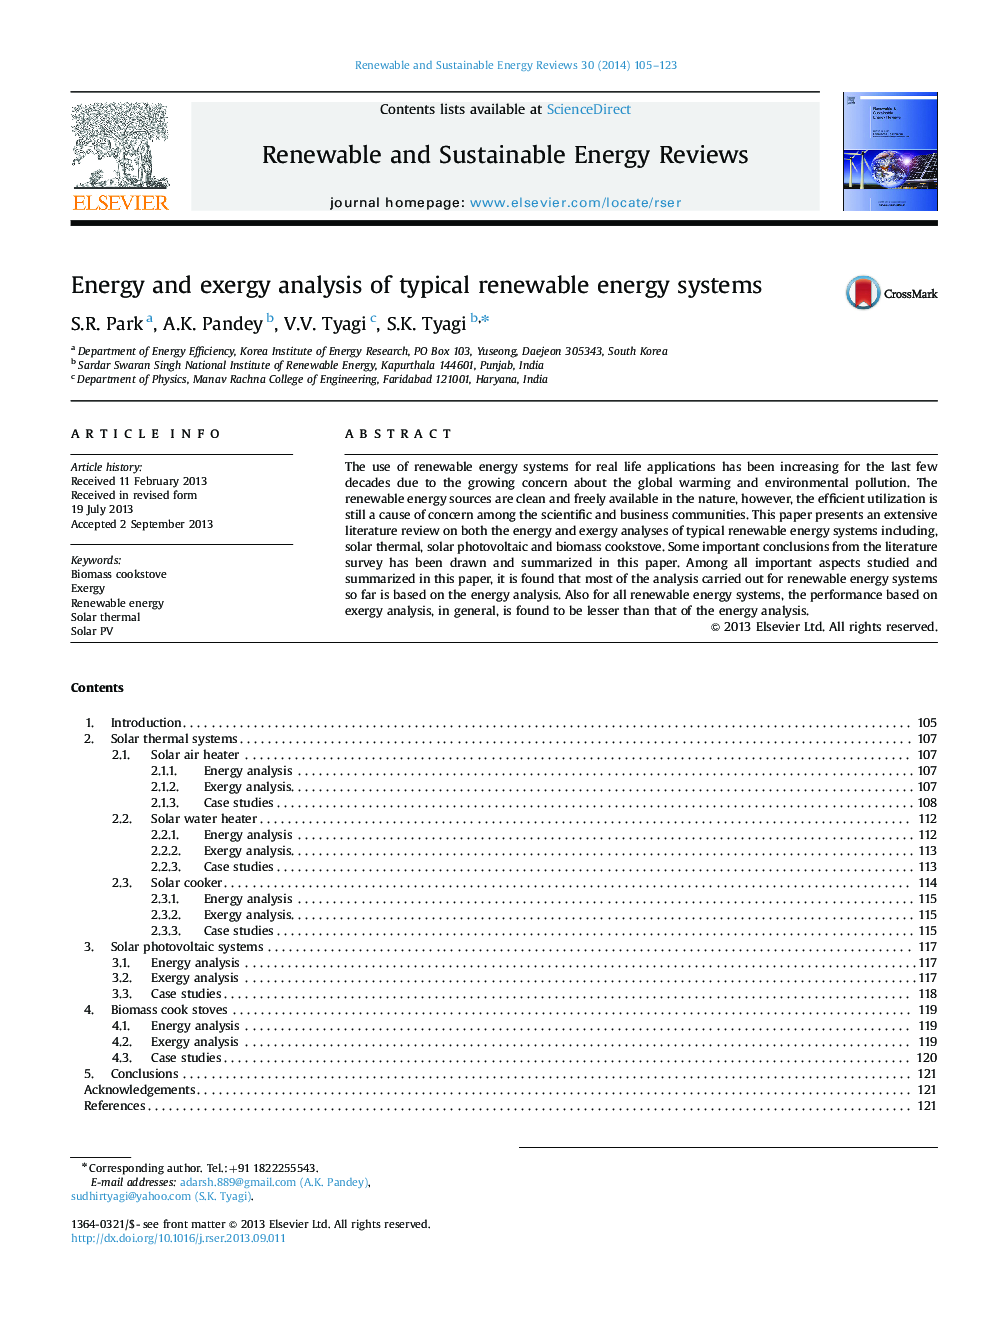 Energy and exergy analysis of typical renewable energy systems